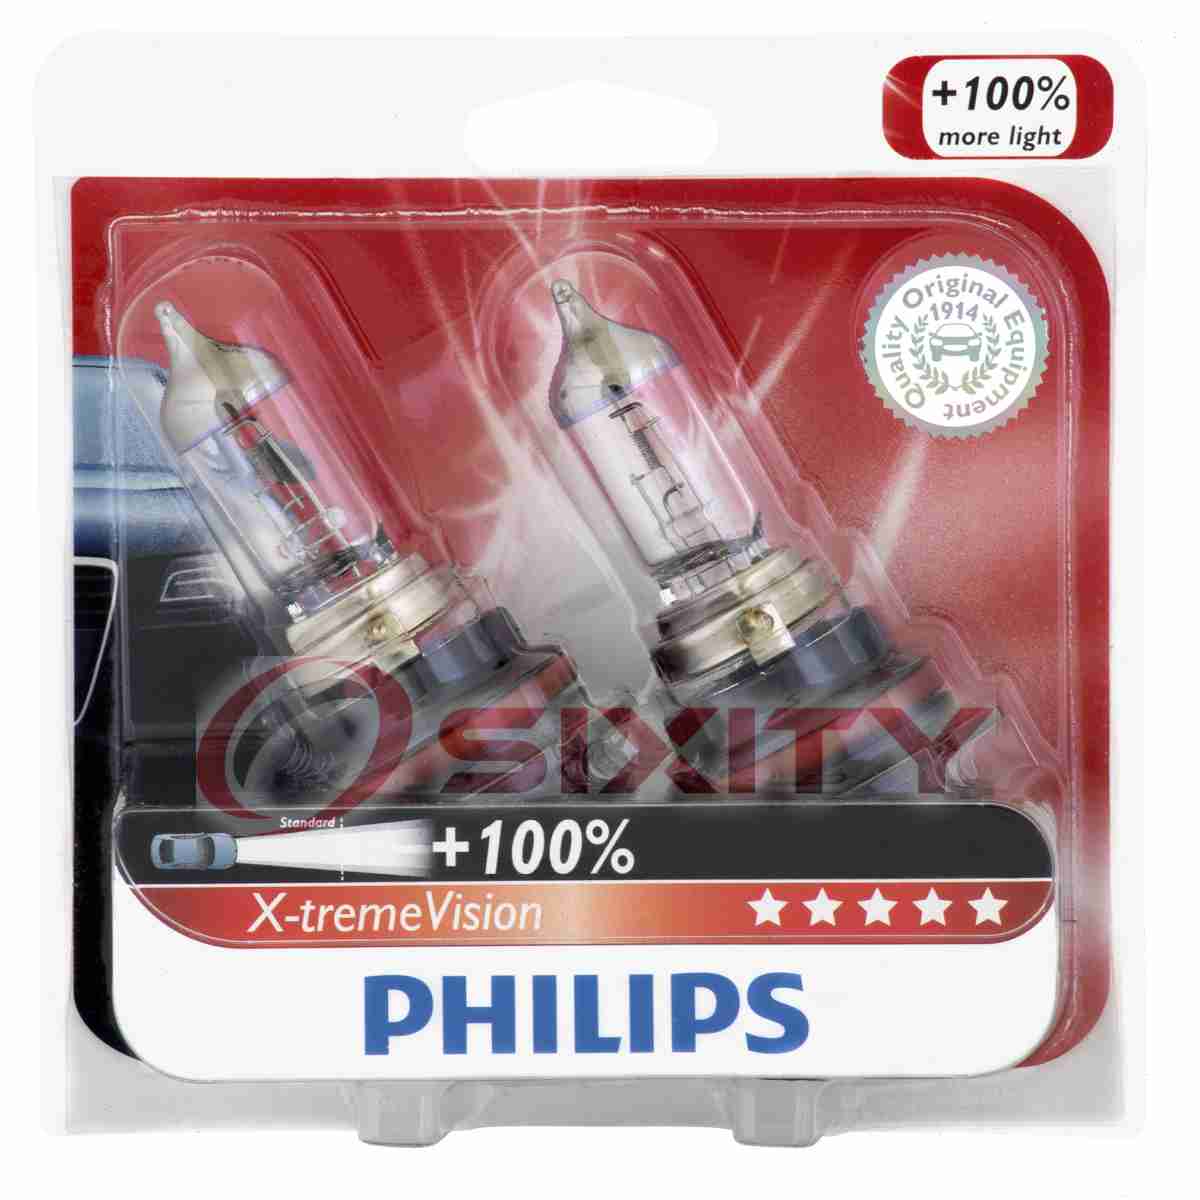 Philips 9007. Hb5 9007 px29t. Philips Blue Vision hb5 9007bv. Лампочка hb5. Фара филипс